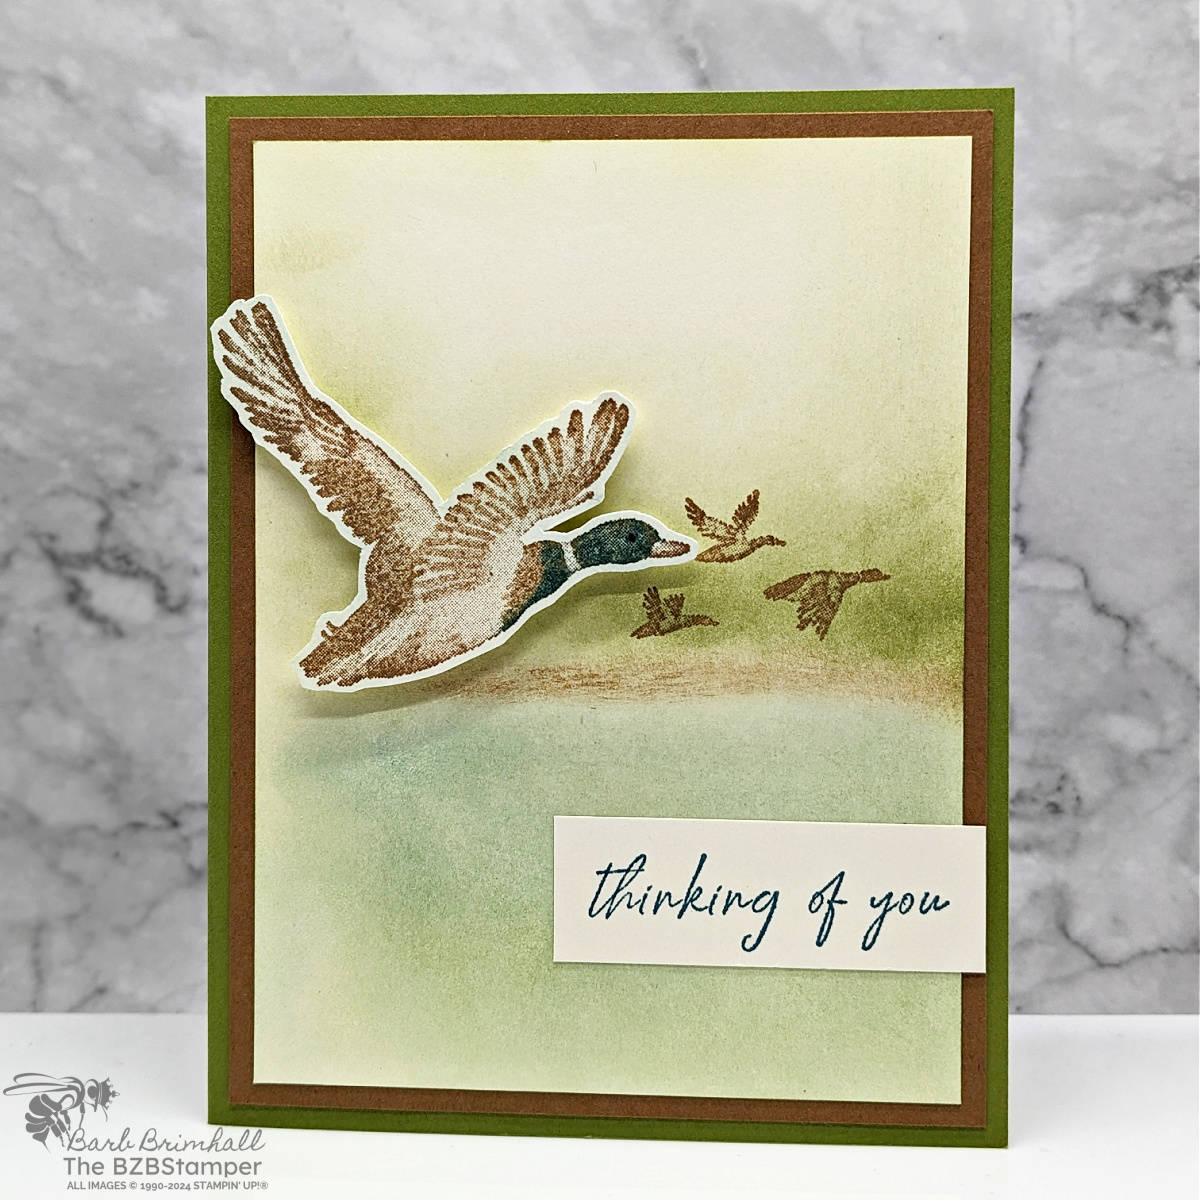 Feathered Flight Thinking of You Card in browns and greens, featuring a duck in flight., with a sponged background.